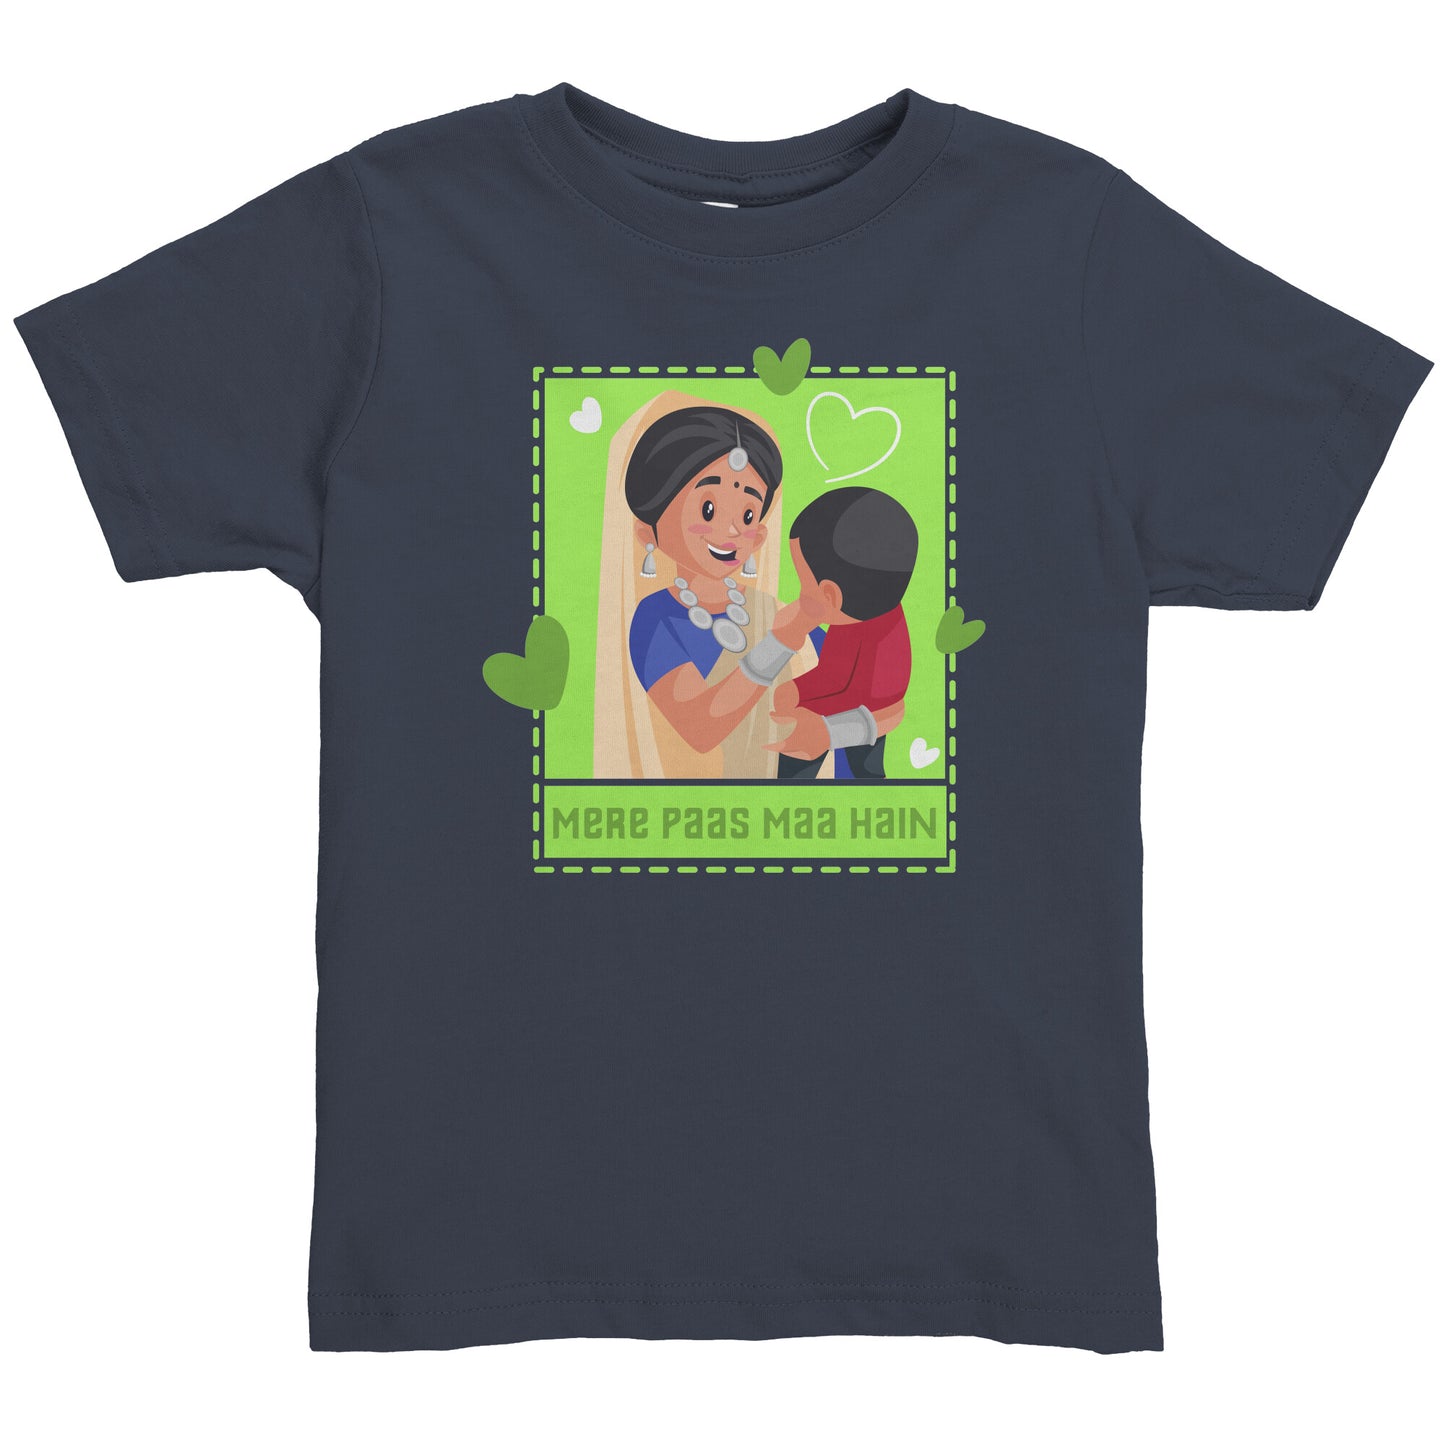 Mere Paas Maa Hain Toddler Sizes